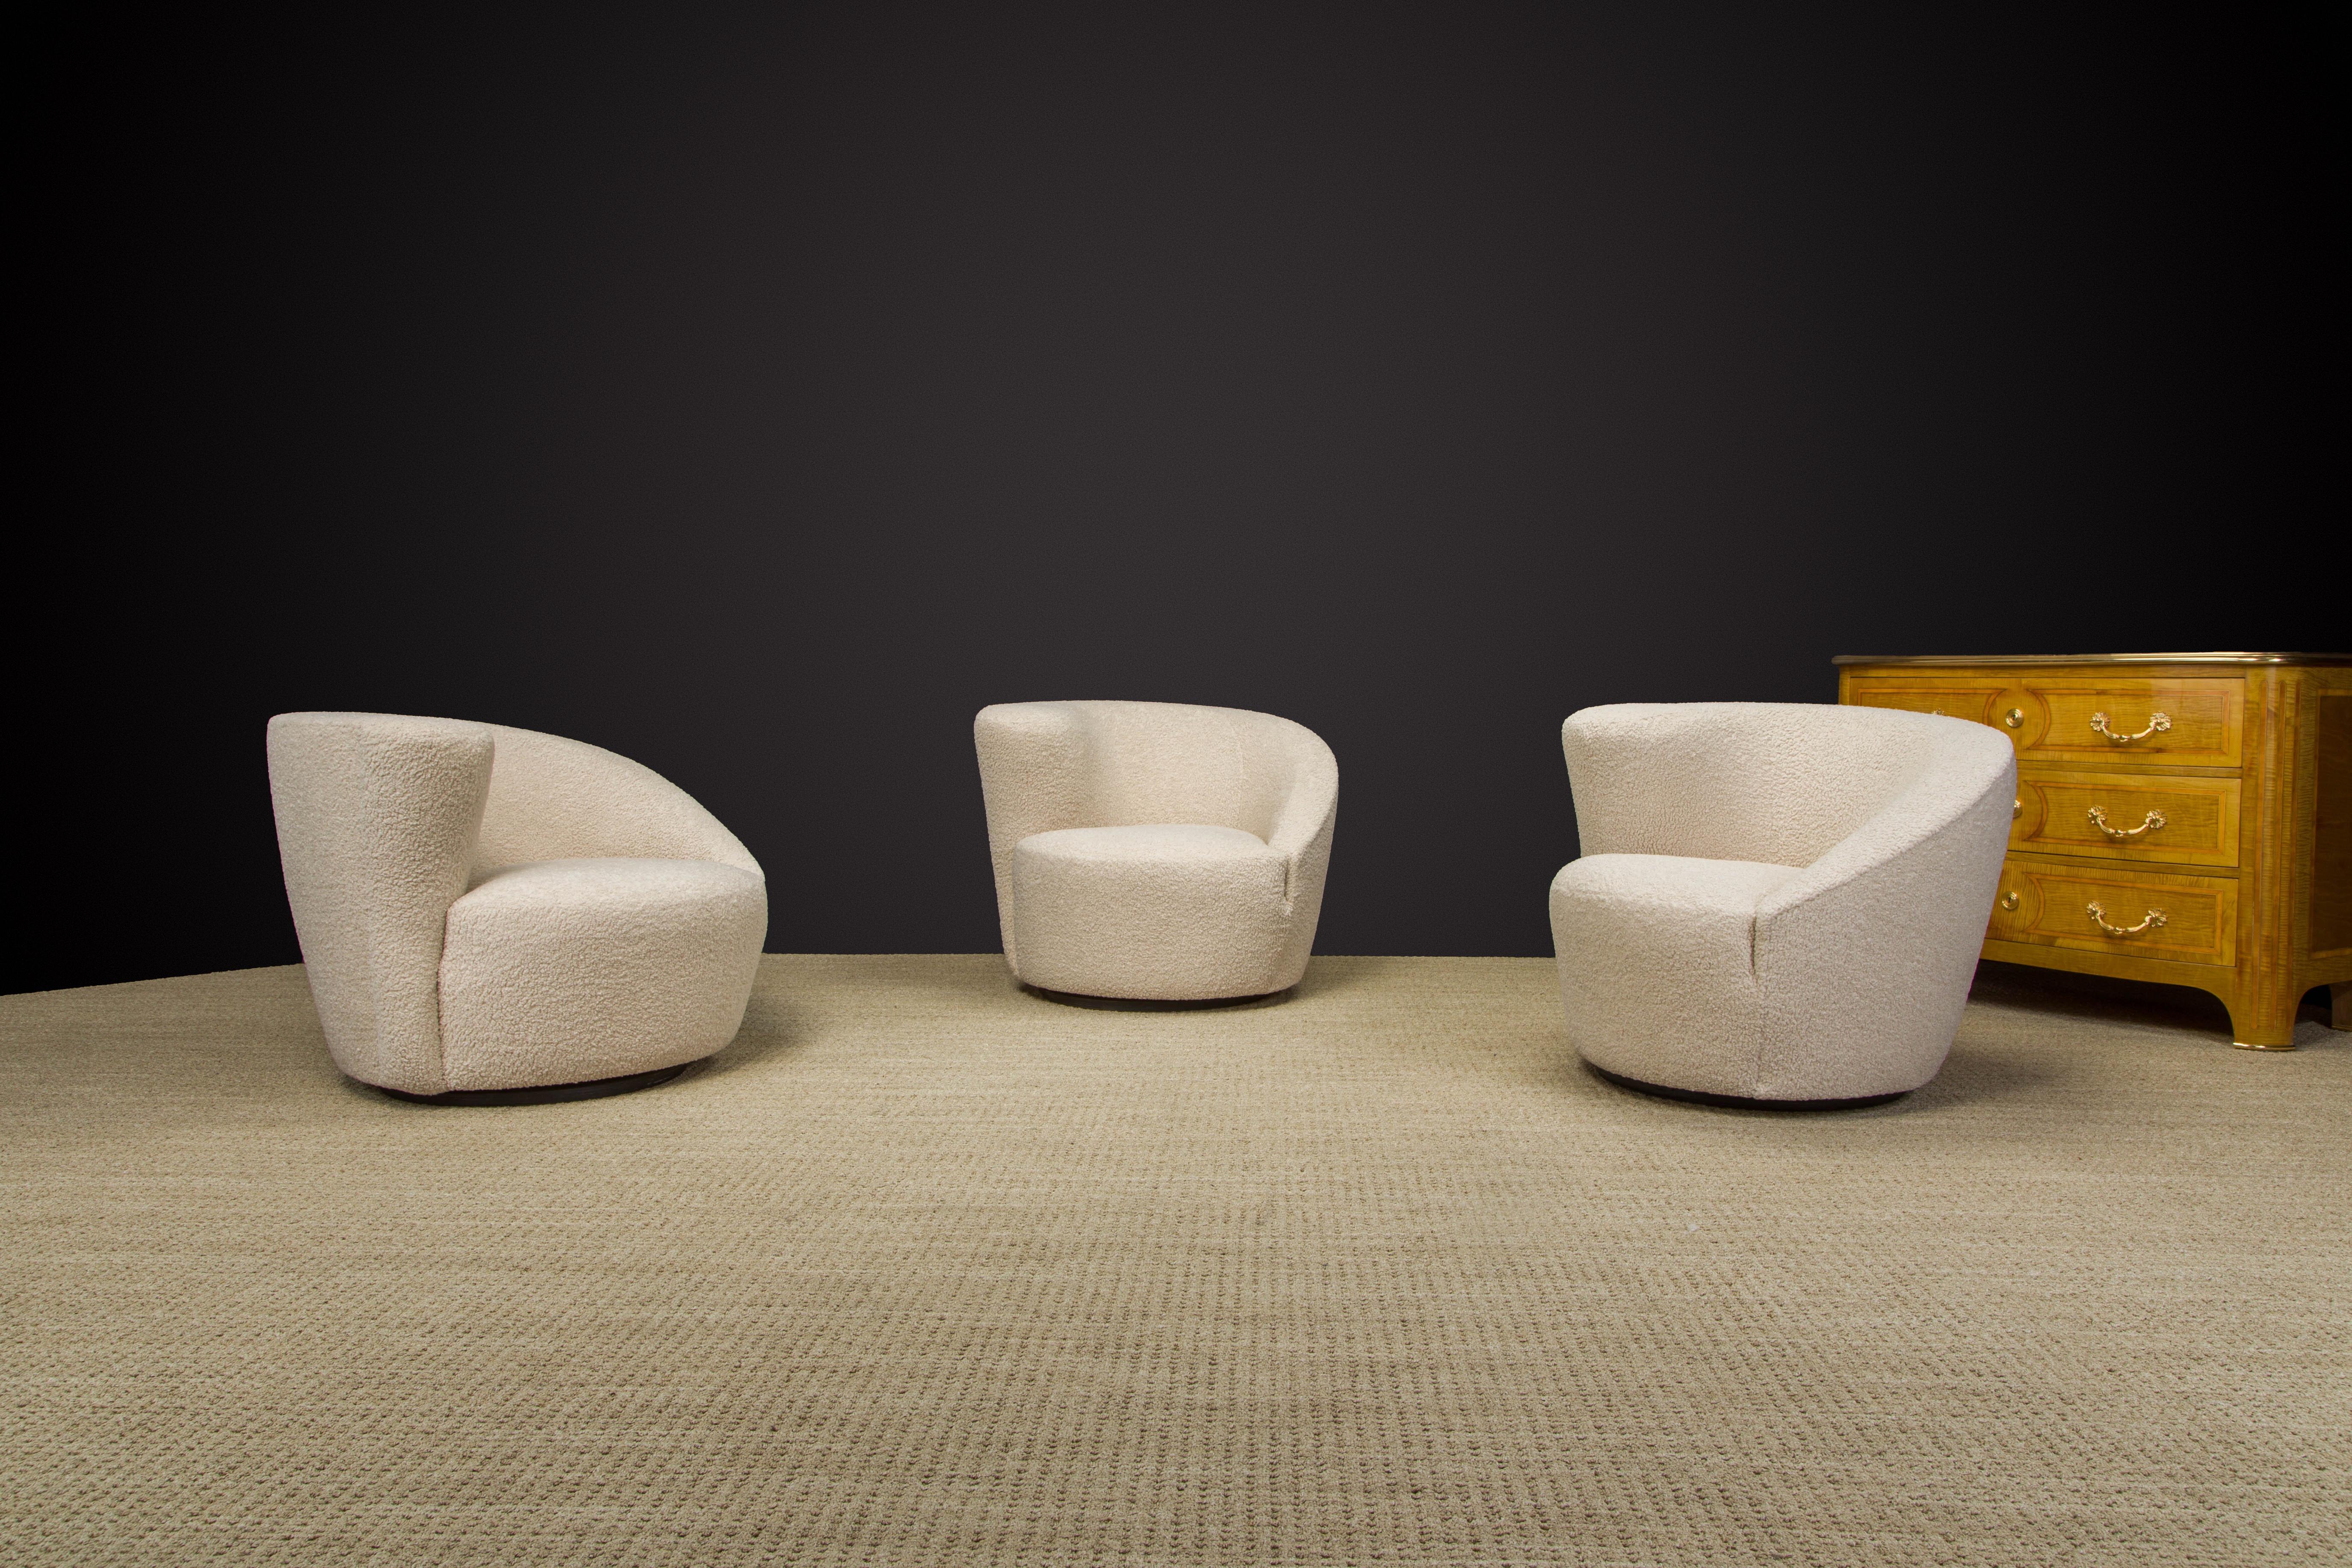 Newly reupholstered in a soft and nubby light beige bouclé, these 'Corkscrew' swivel chairs, also often referred to as 'Nautilus', by Vladimir Kagan for Directional, circa 1980s / 90s are signed with Directional labels underneath. These classic